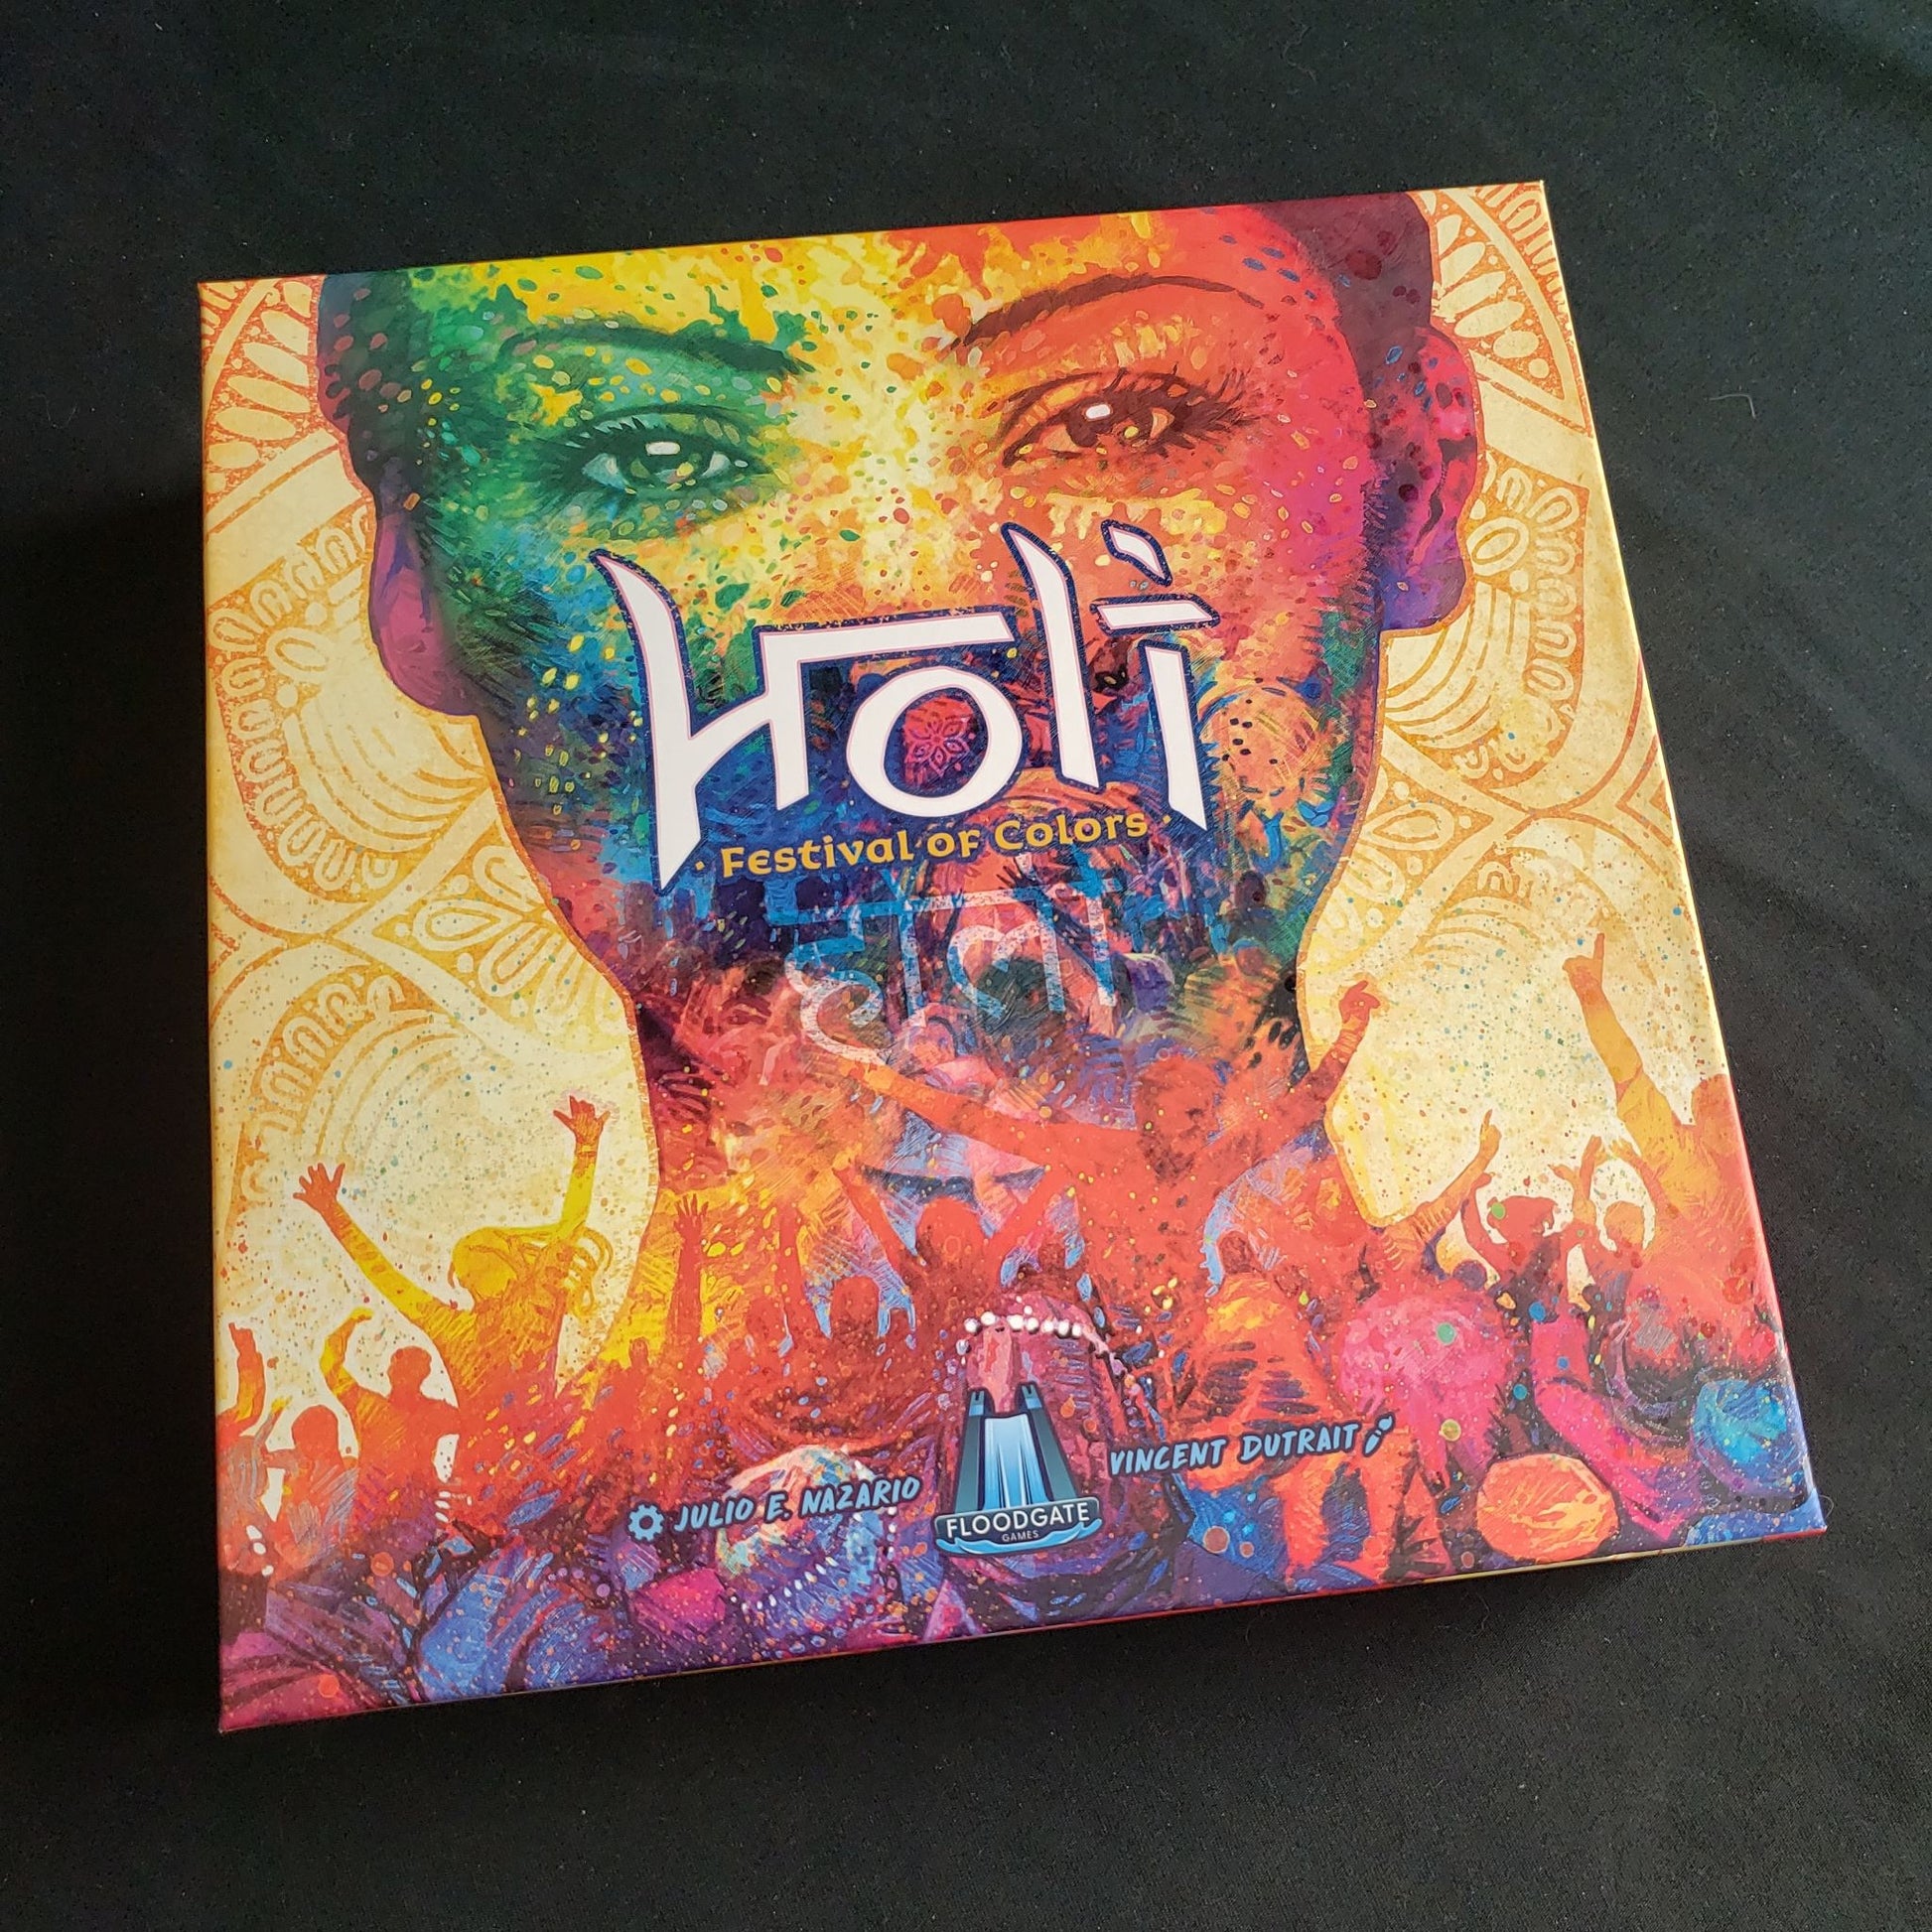 Image shows the front cover of the box of the Holi: Festival of Colors board game